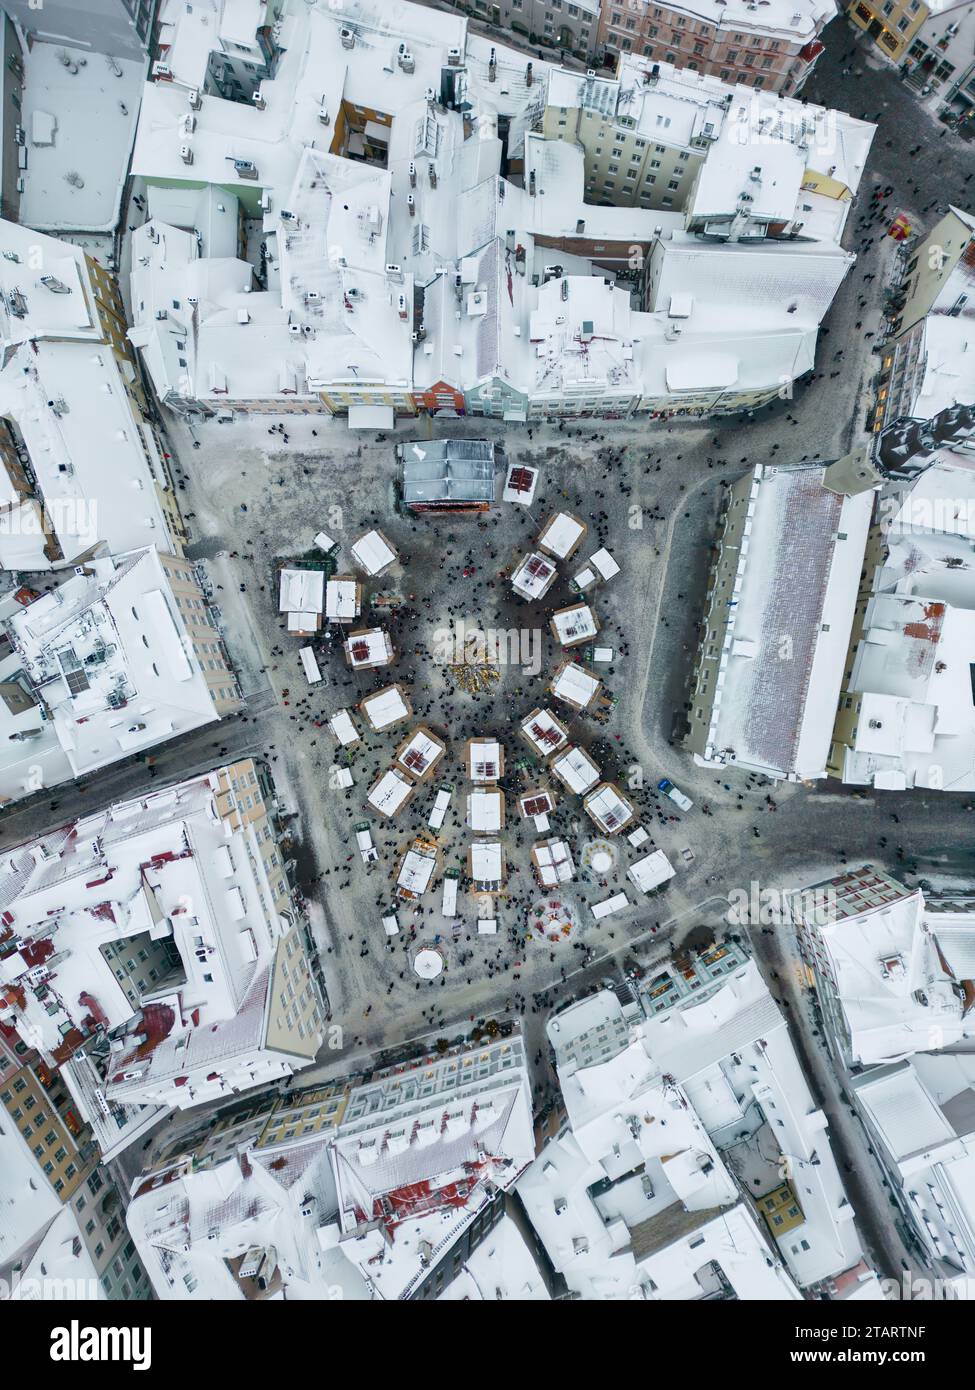 Bird's eye view of the Christmas market in Tallinn's old town townhall square, Raekoja Plats. Stock Photo